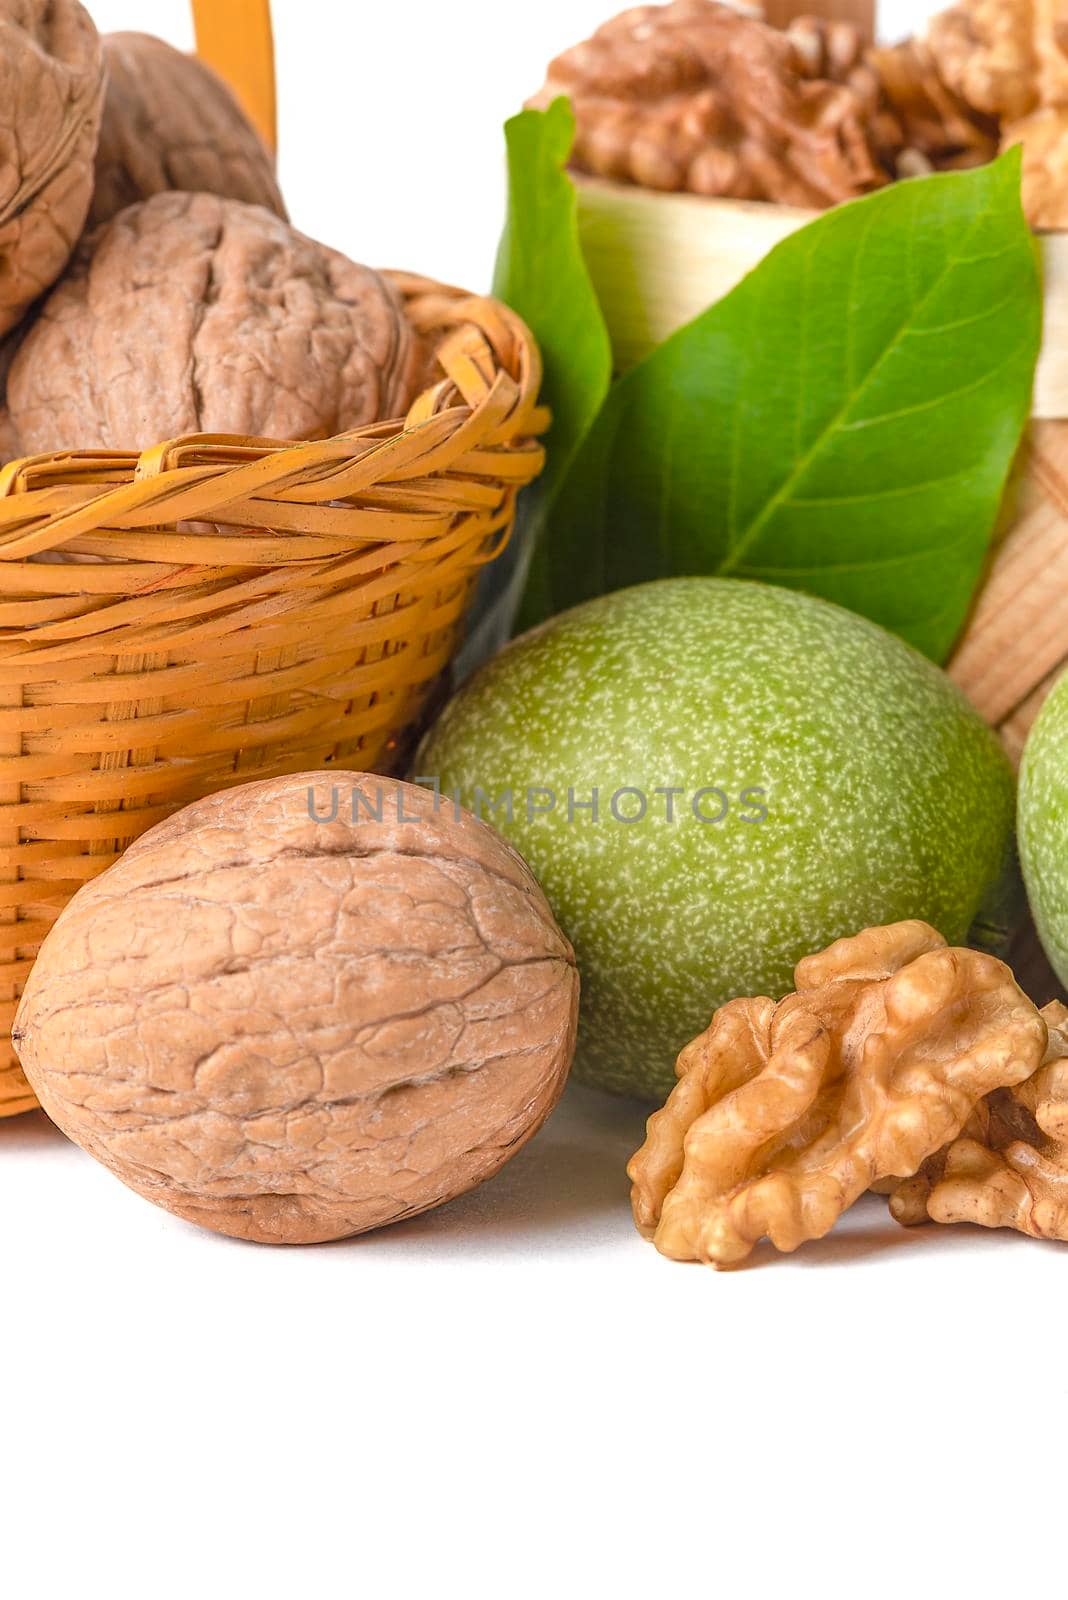 Walnut. Walnut fruits of different varieties lie in wooden saucers and baskets on a white isolated background. Nearby are green leaves and unripe walnut fruits. by SERSOL